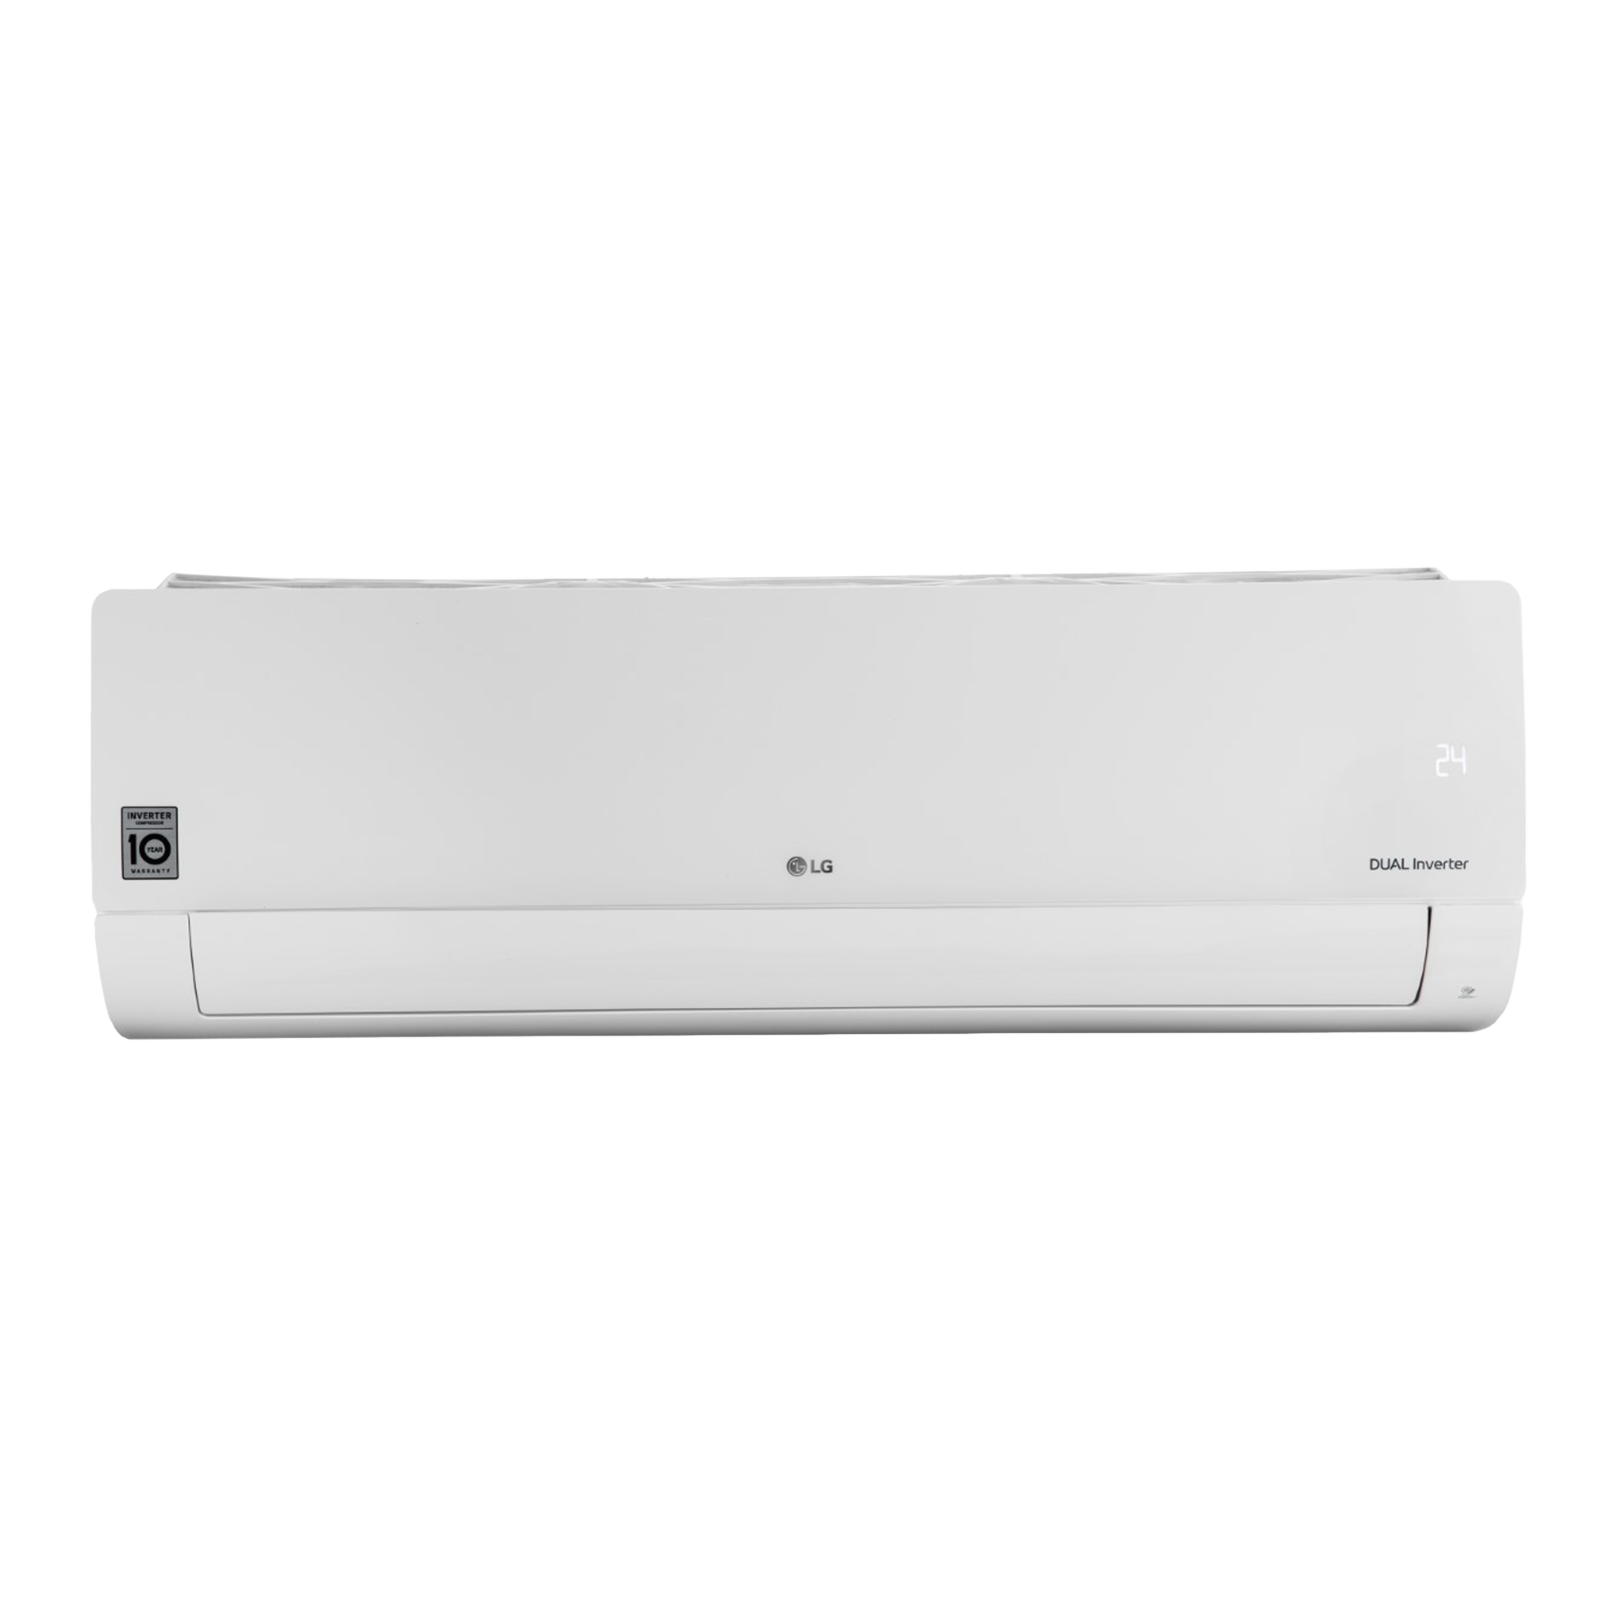 LG 1.5 Ton 5 Star Inverter Split AC (Copper Condenser, HD Filter with Anti Virus Protection, RS-Q19KNZE.AMLG)